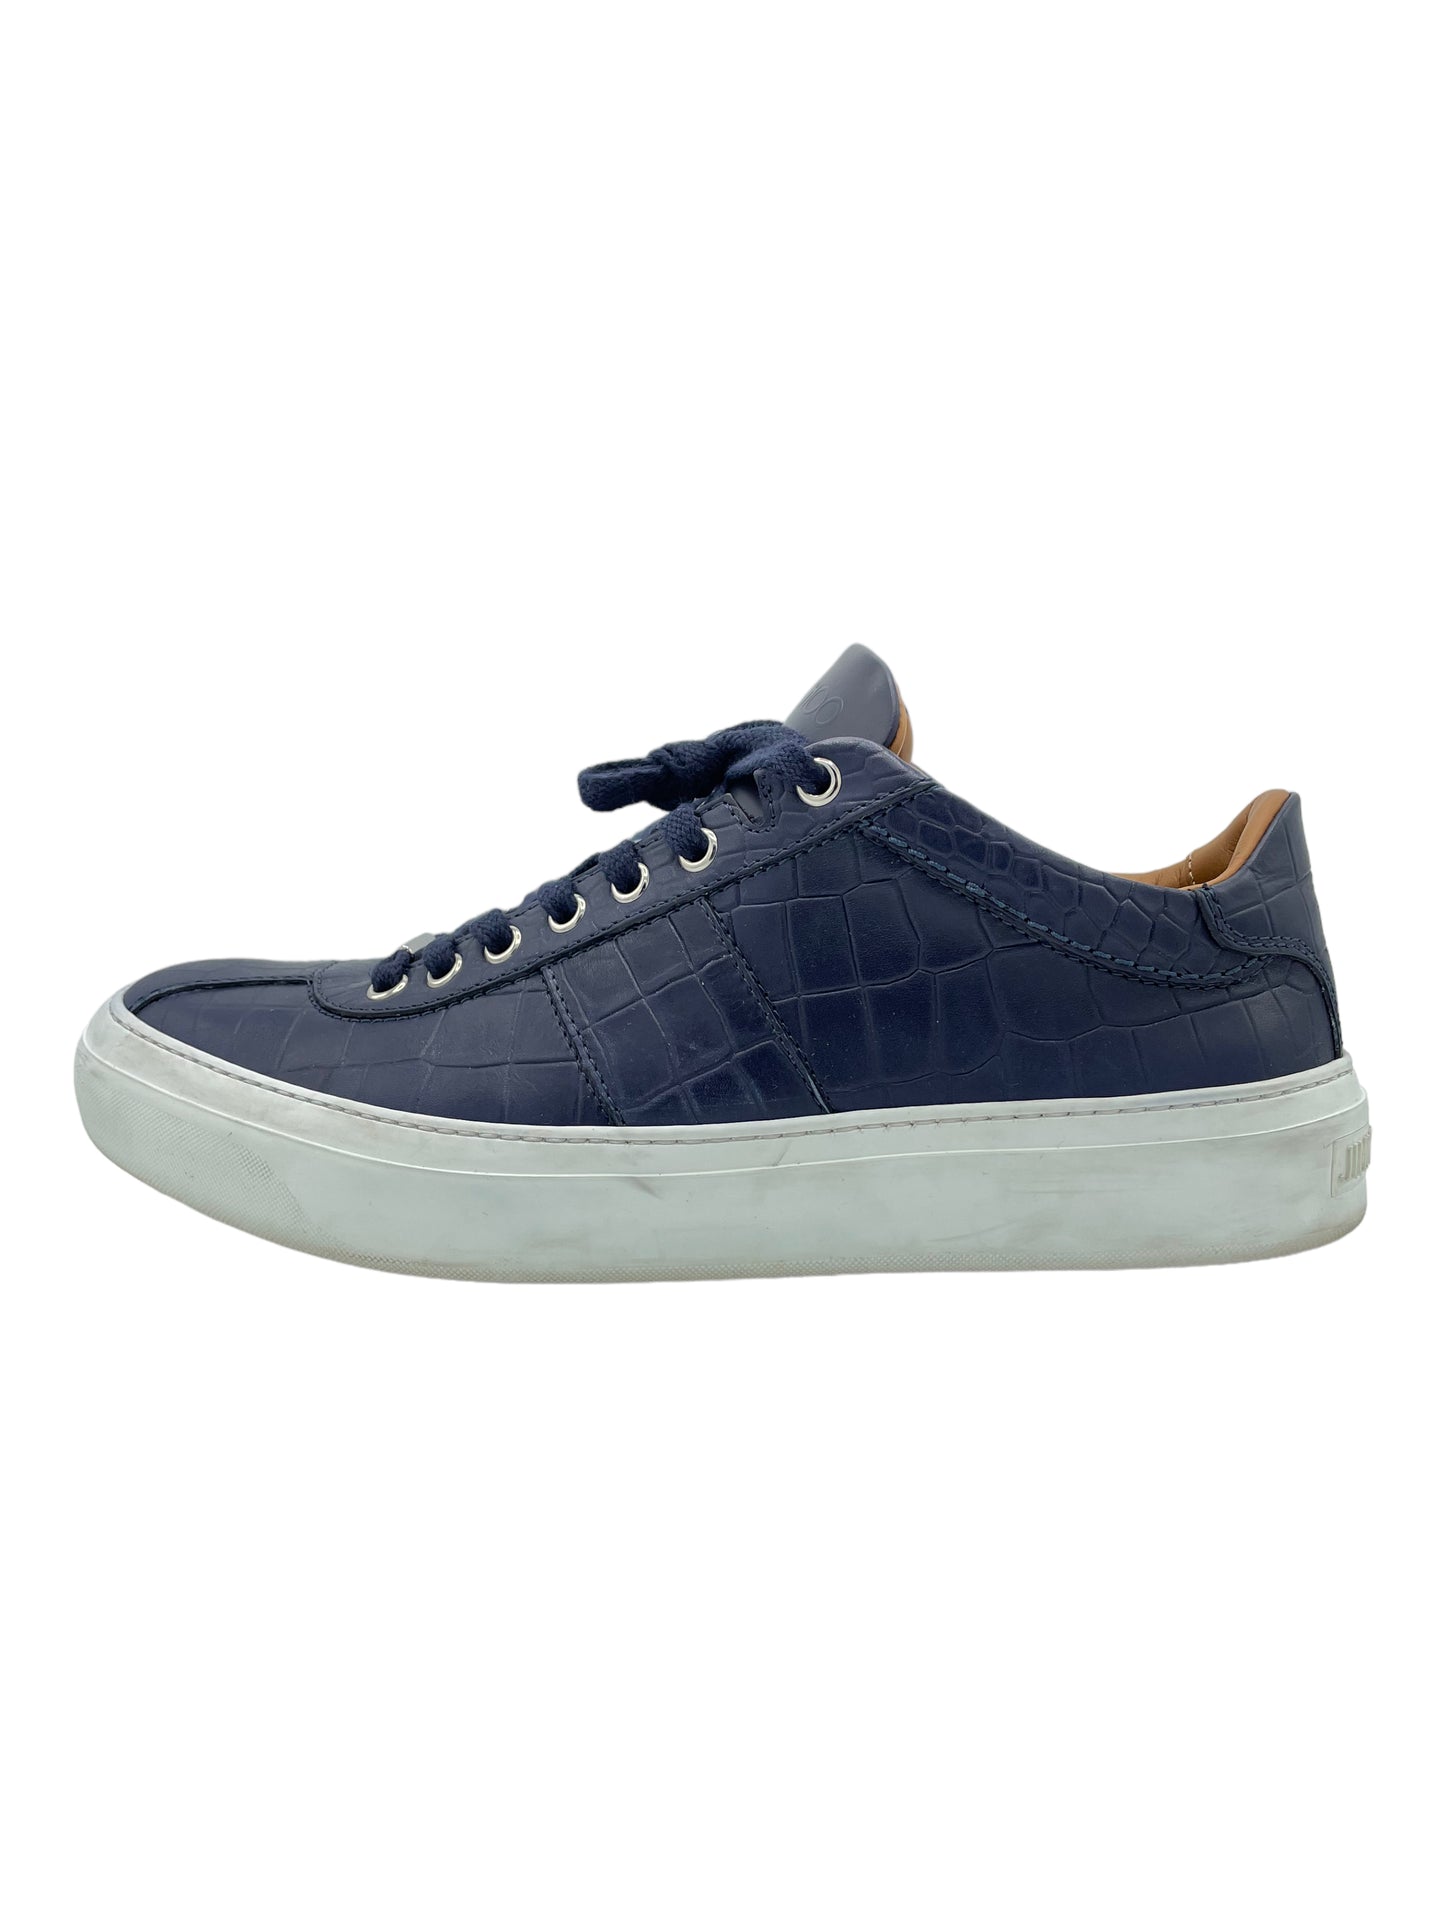 Jimmy Choo Navy Blue Croc Sneakers - Genuine Design Luxury Consignment for Men. New & Pre-Owned Clothing, Shoes, & Accessories. Calgary, Canada